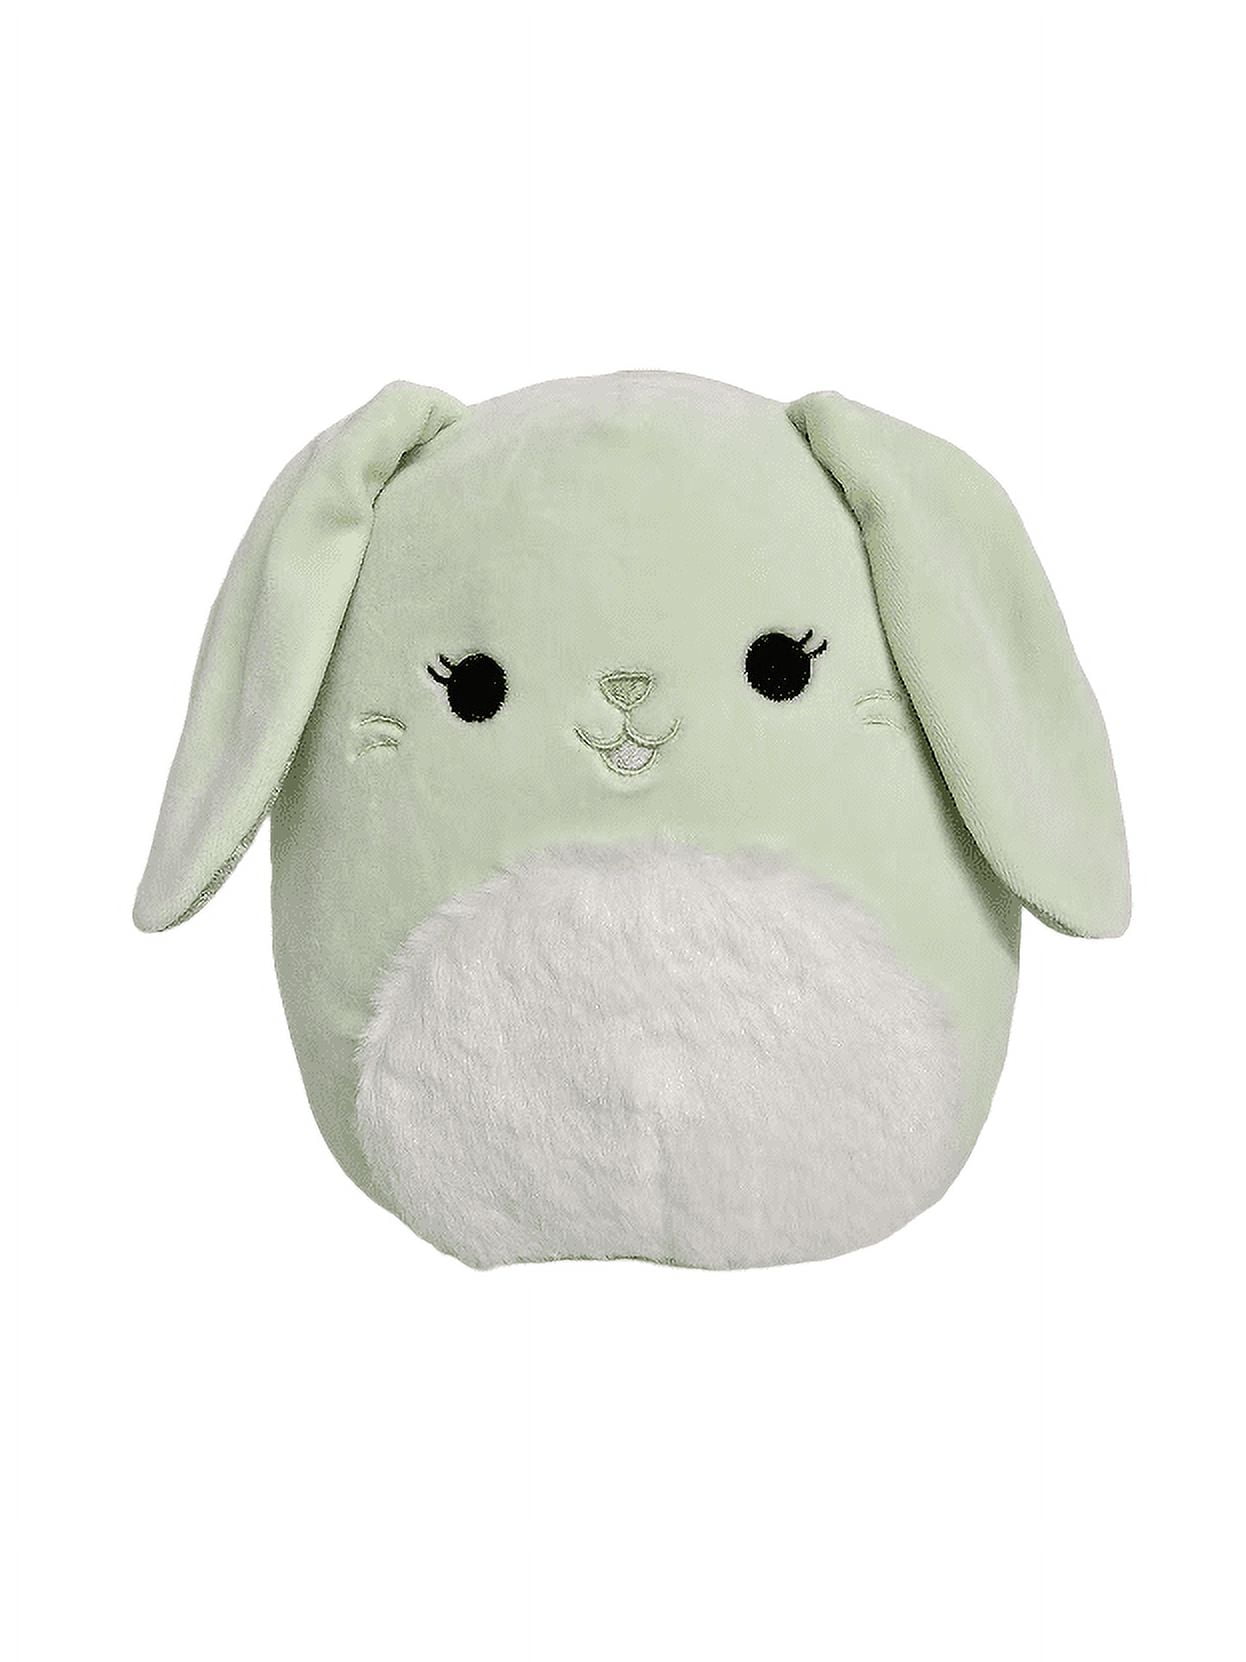 Squishmallows Official Kellytoys Plush 8 Inch Hara the Green Bunny Ultimate  Soft Plush Stuffed Toy Easter Edition 